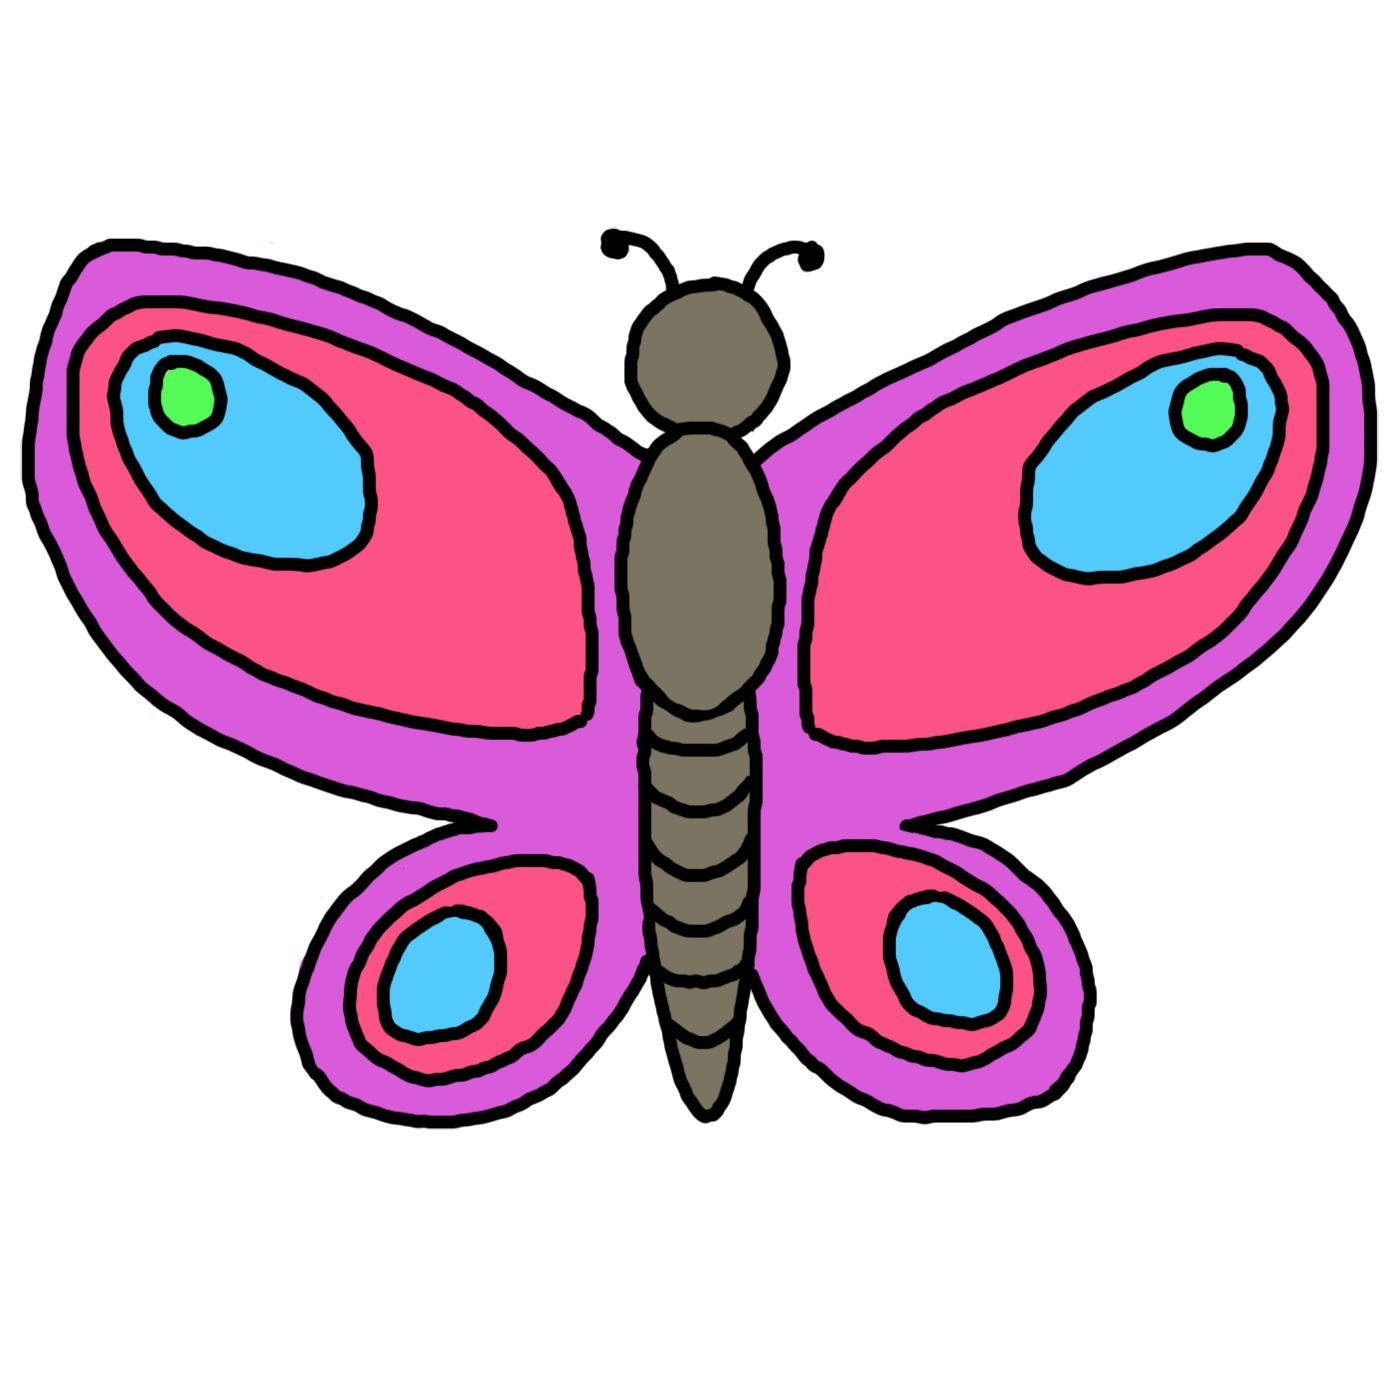 Free butterfly images.